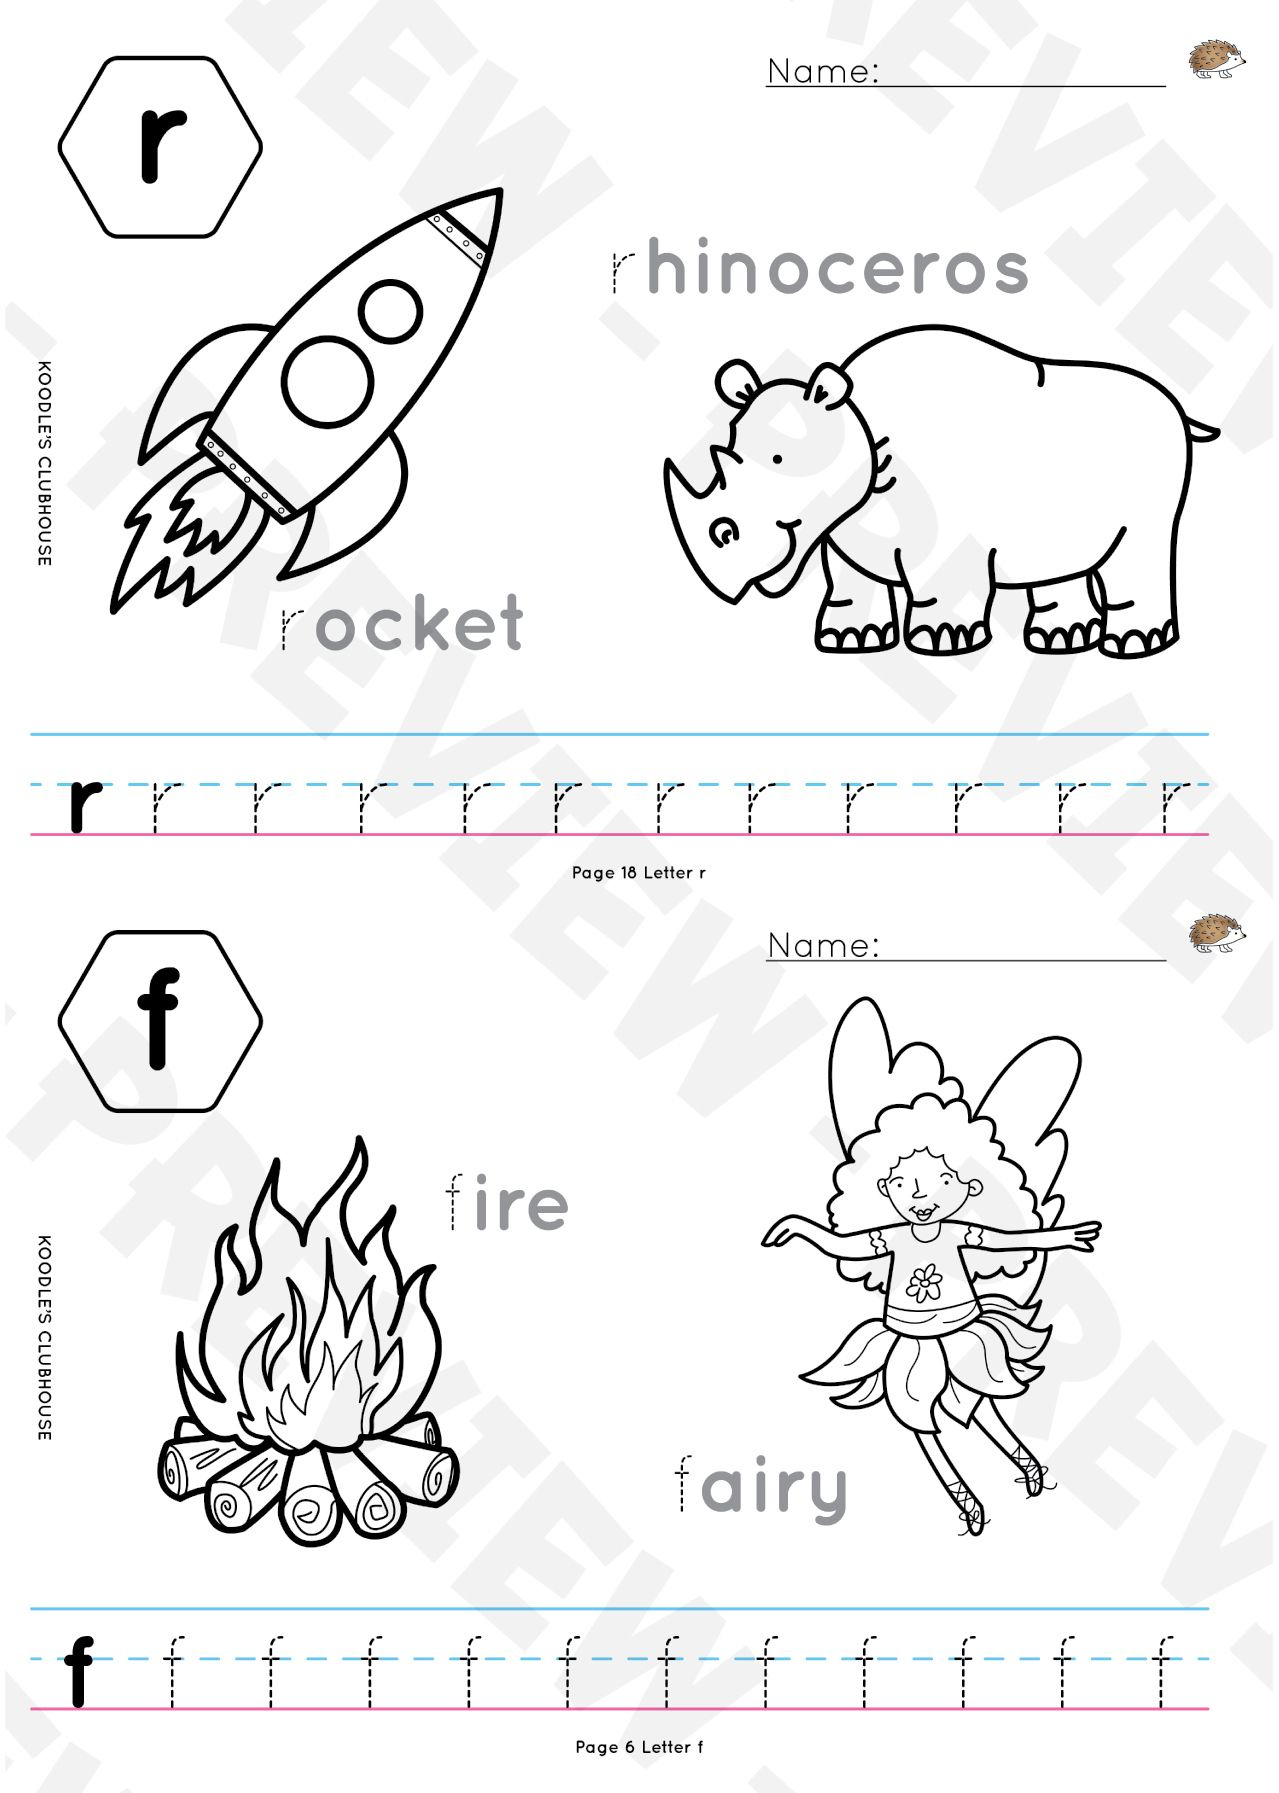 A To Z Tracing Worksheets | Tracing Worksheets, Teaching throughout Name Tracing Outline